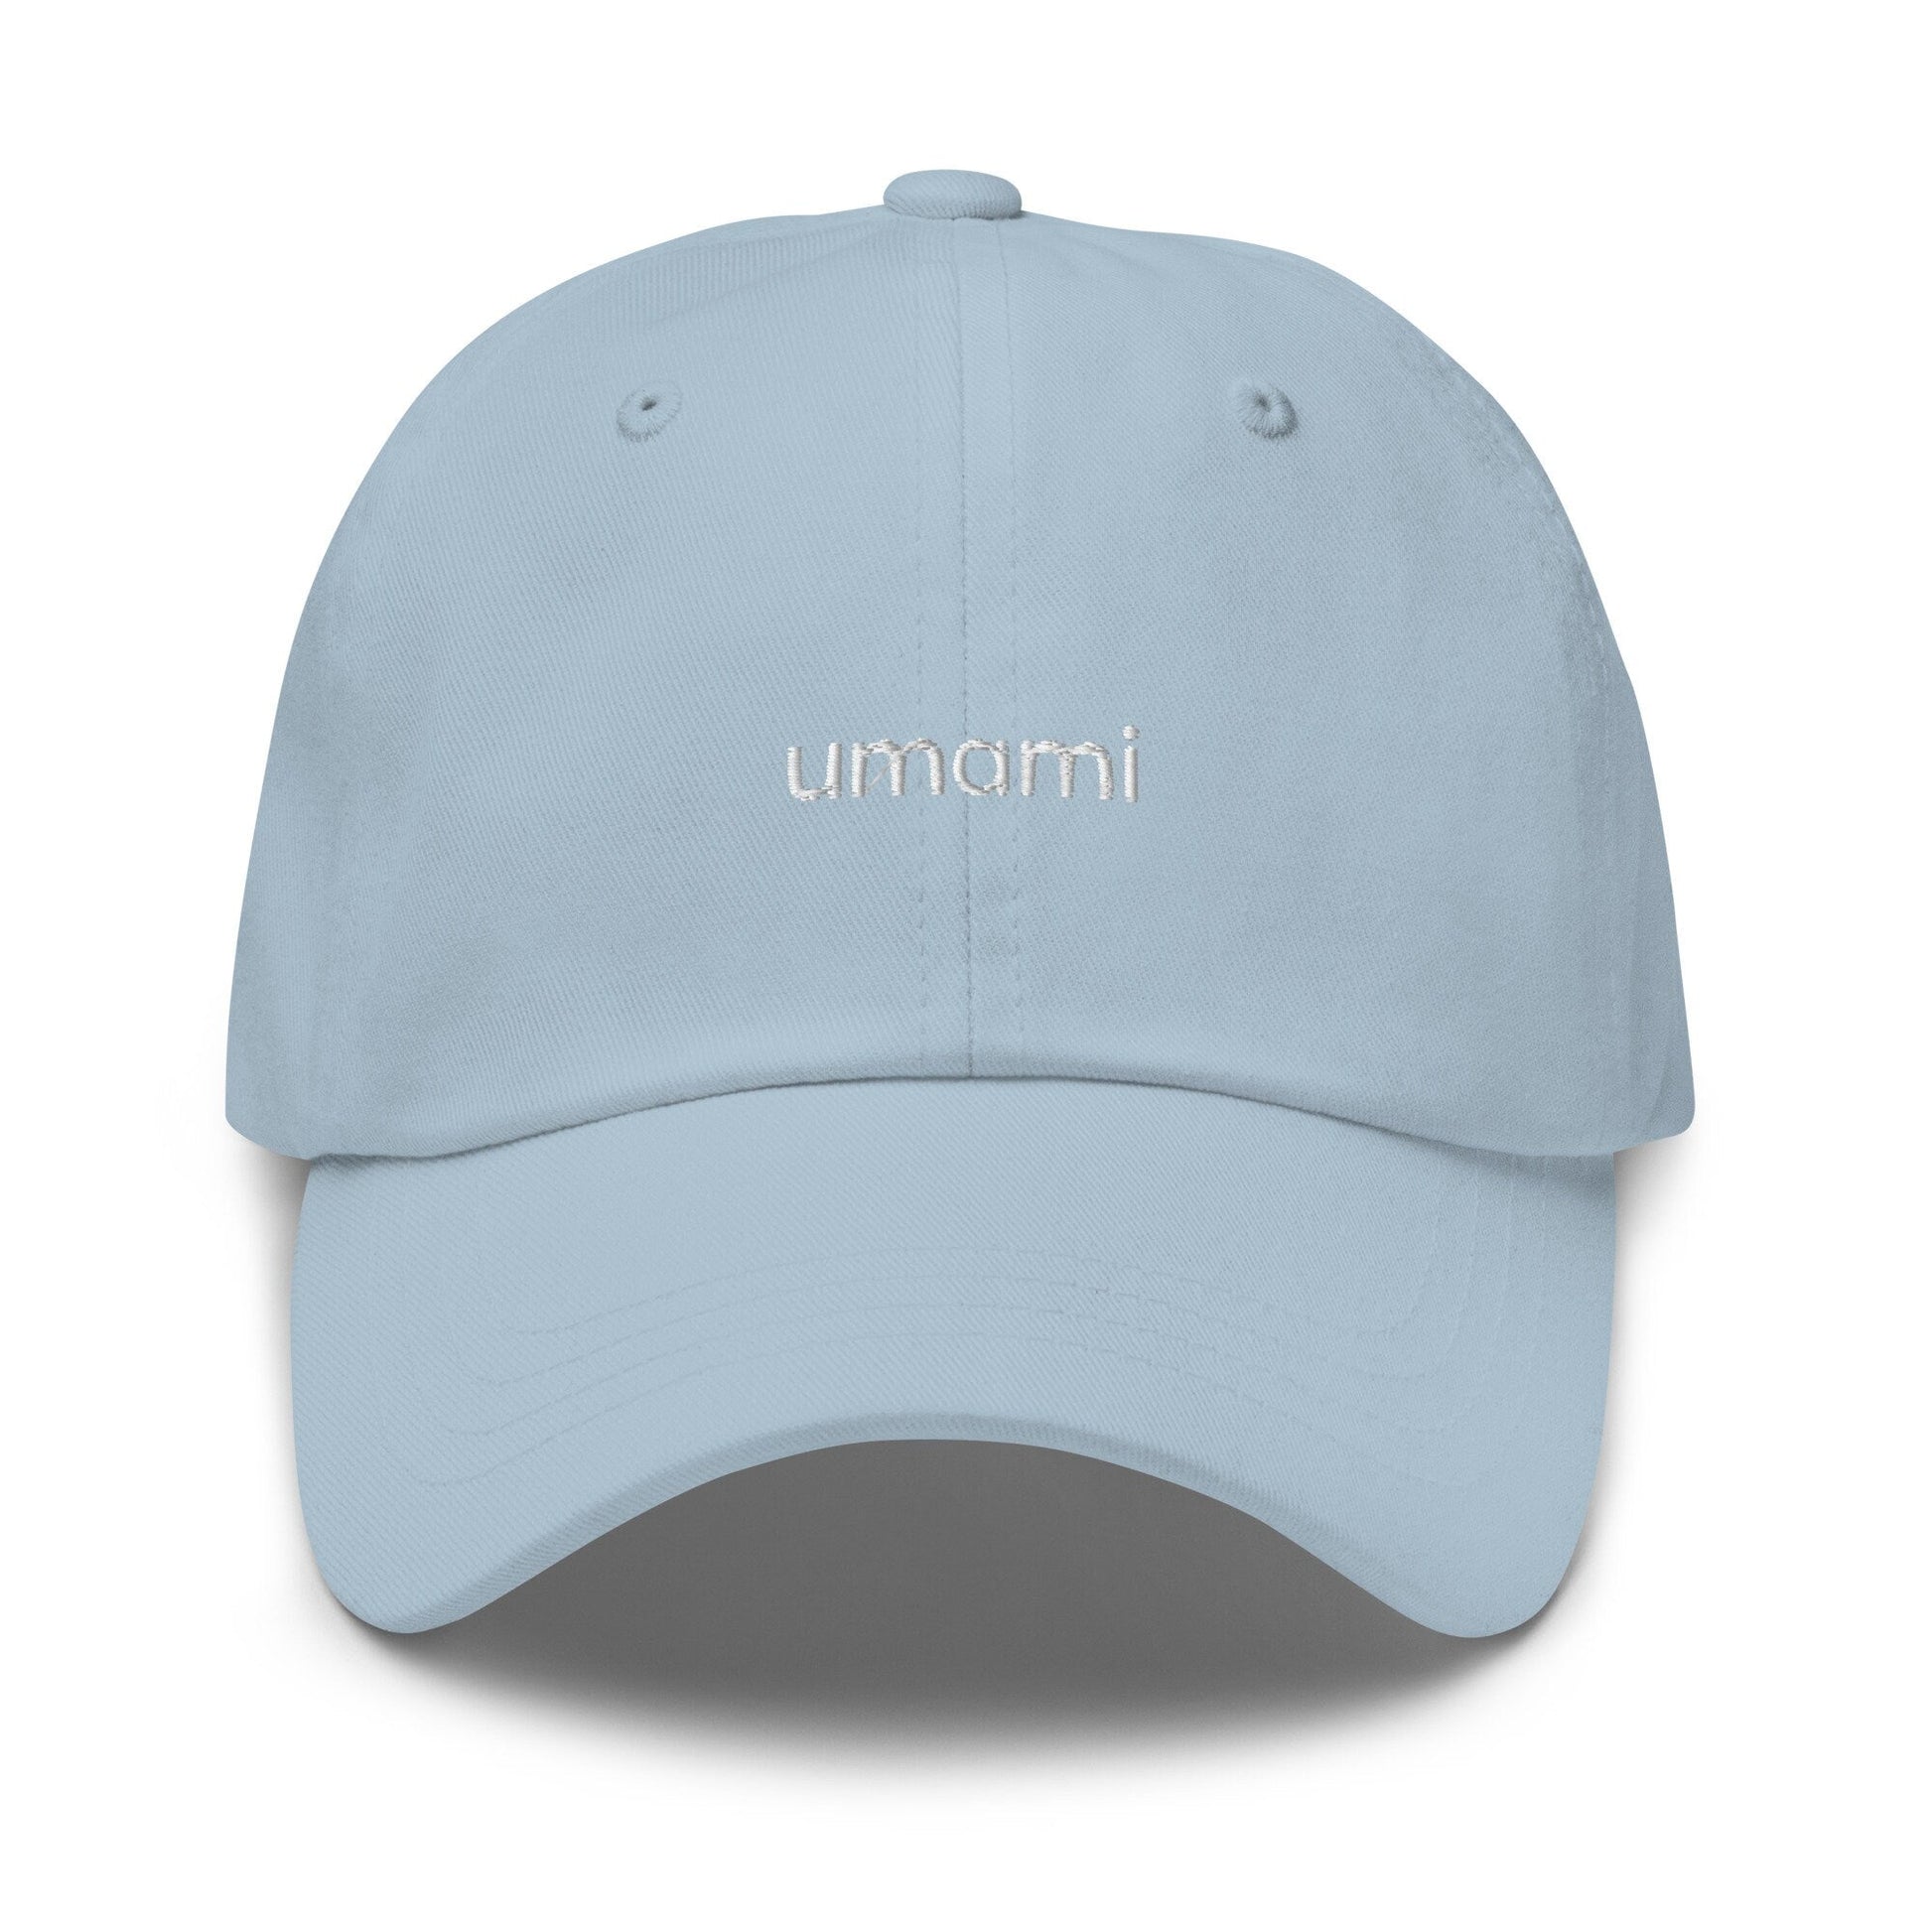 Umami Dad Hat - Gift for Foodies and Home Chefs - Cotton Embroidered Baseball Cap - Multiple Colors - Evilwater Originals